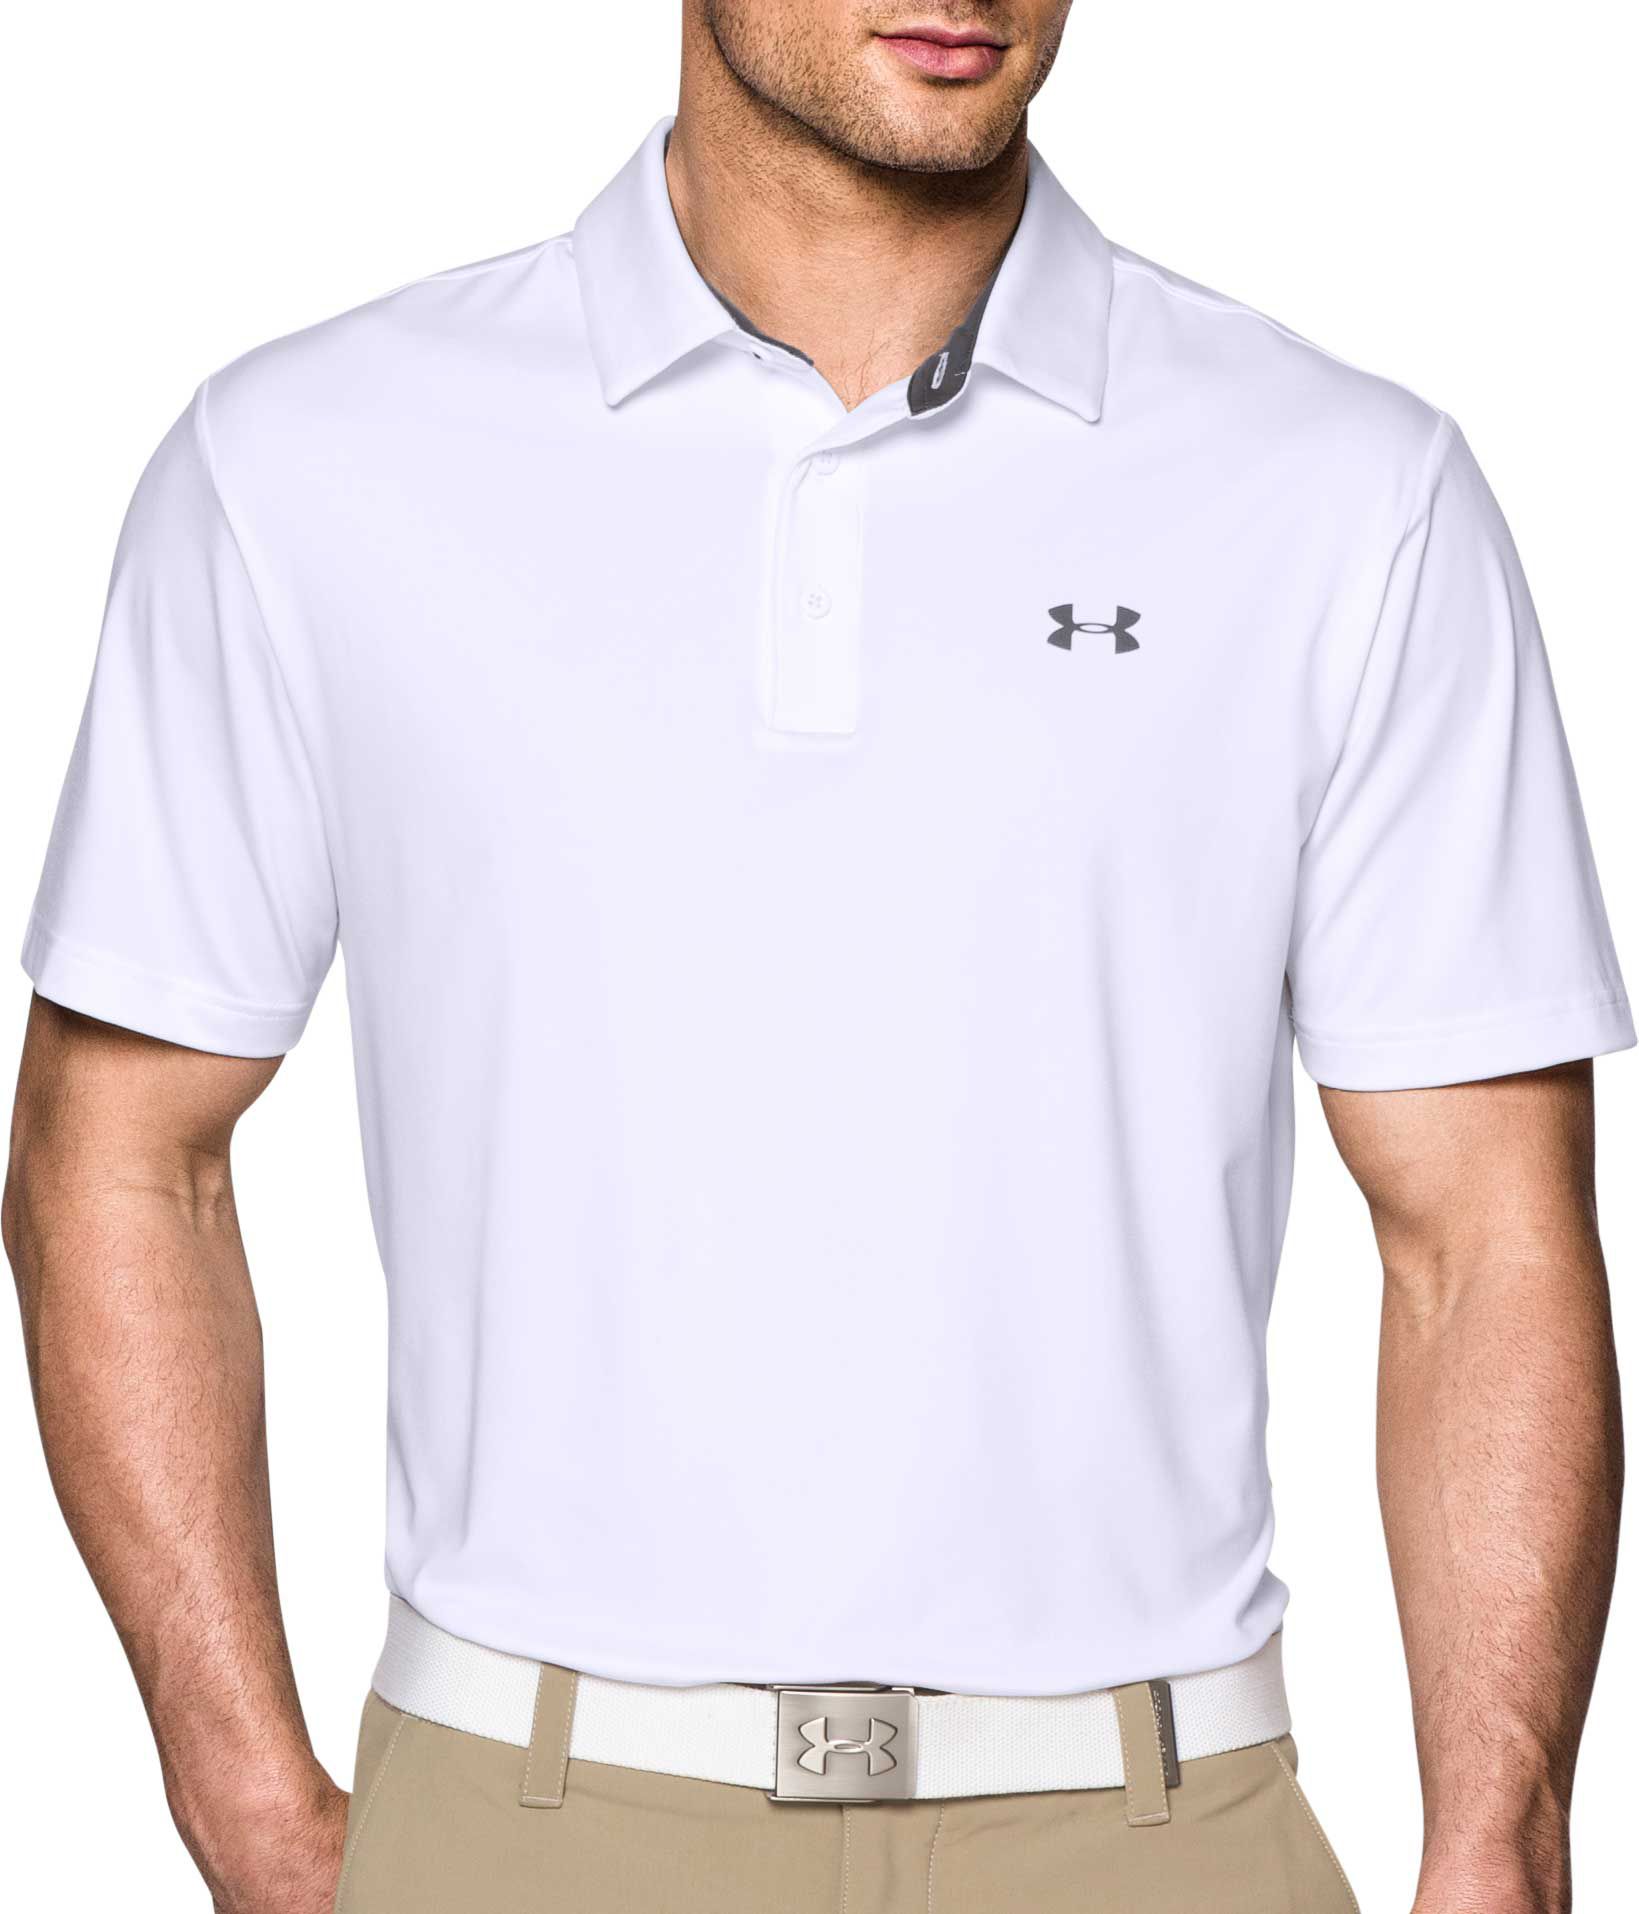 Under Armour Men's Playoff Golf Polo 